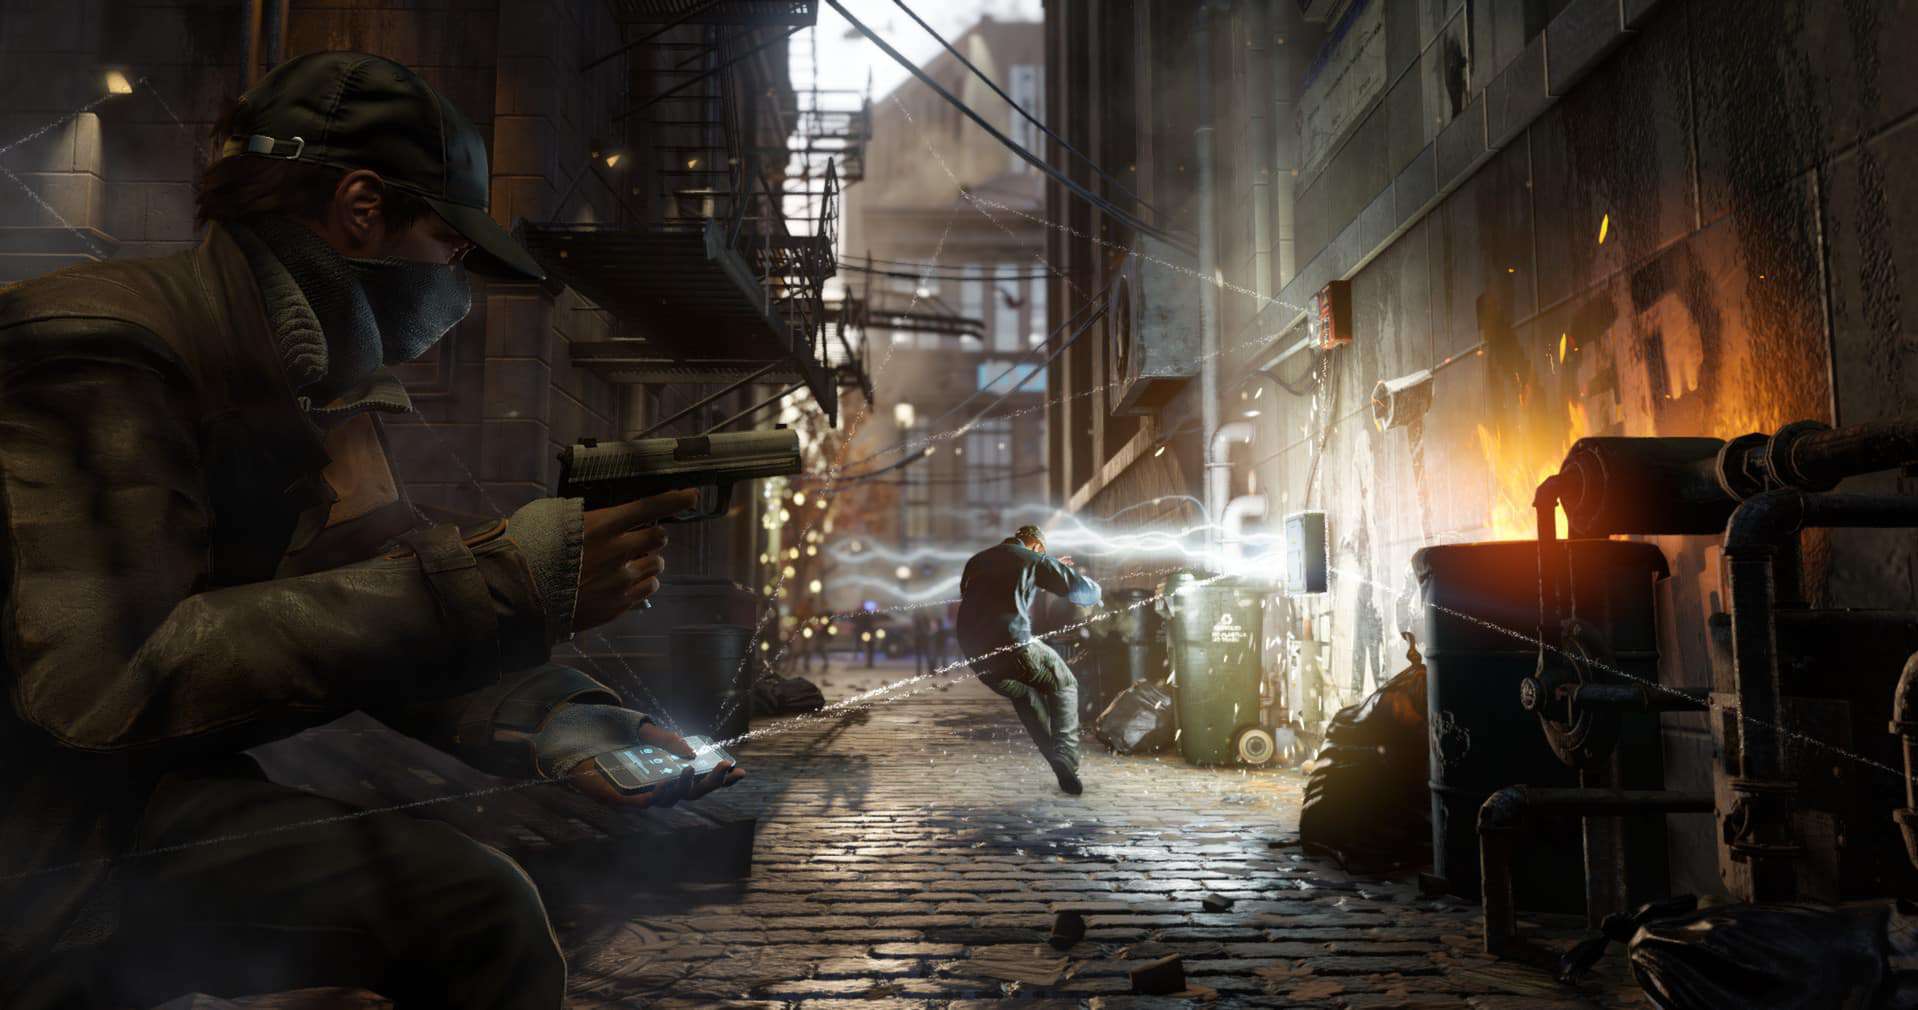 Download Game Watch Dogs Pc Highly Compressed